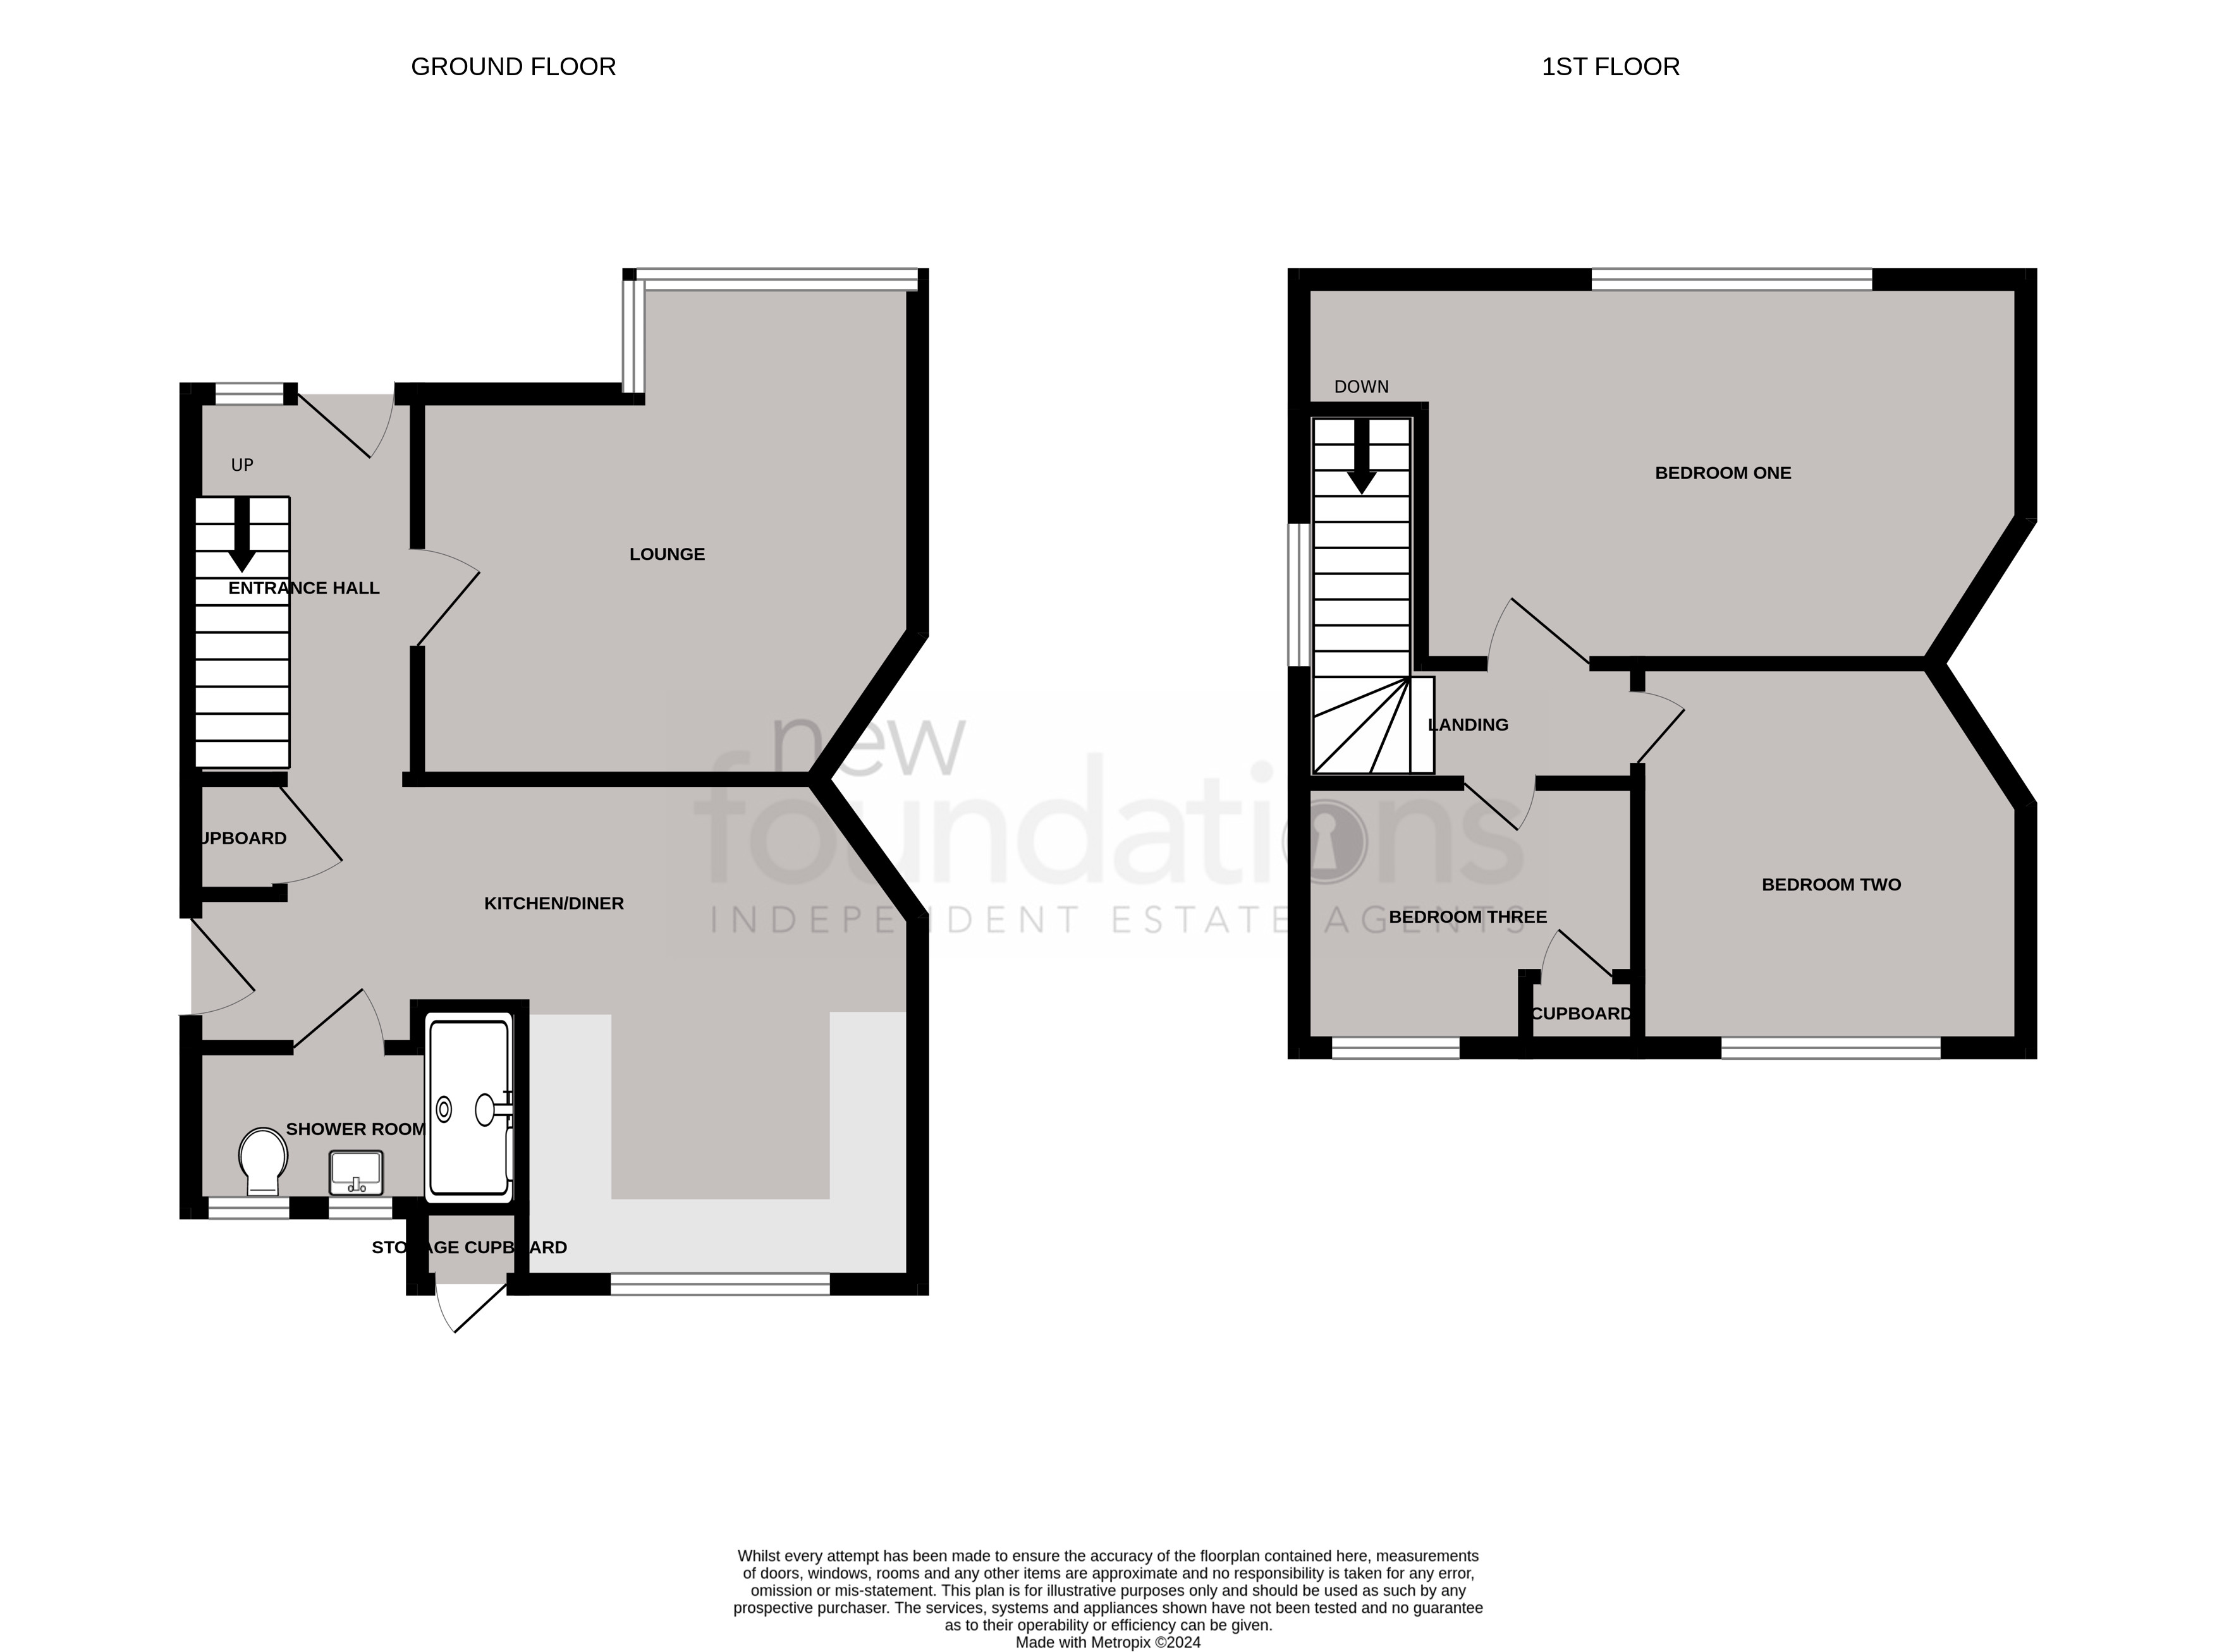 Floorplans For Crowmere Avenue, Bexhill-on-Sea, East Sussex